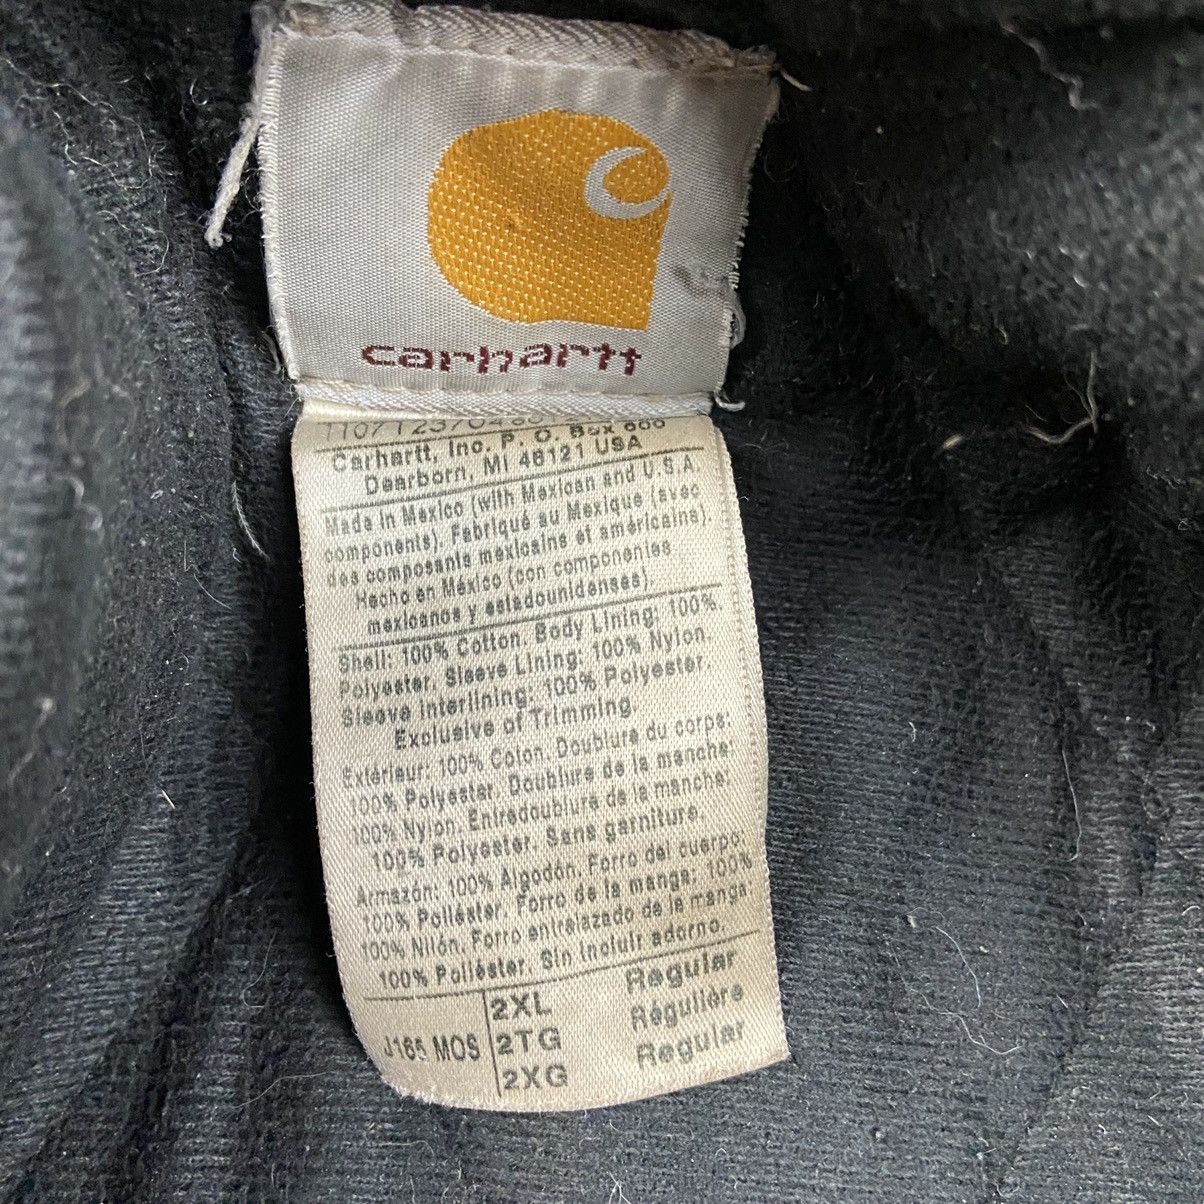 Vintage Carhartt distressed J165 Quilt Lined Duck Bomber Jacket 2XL Size US XXL / EU 58 / 5 - 13 Preview